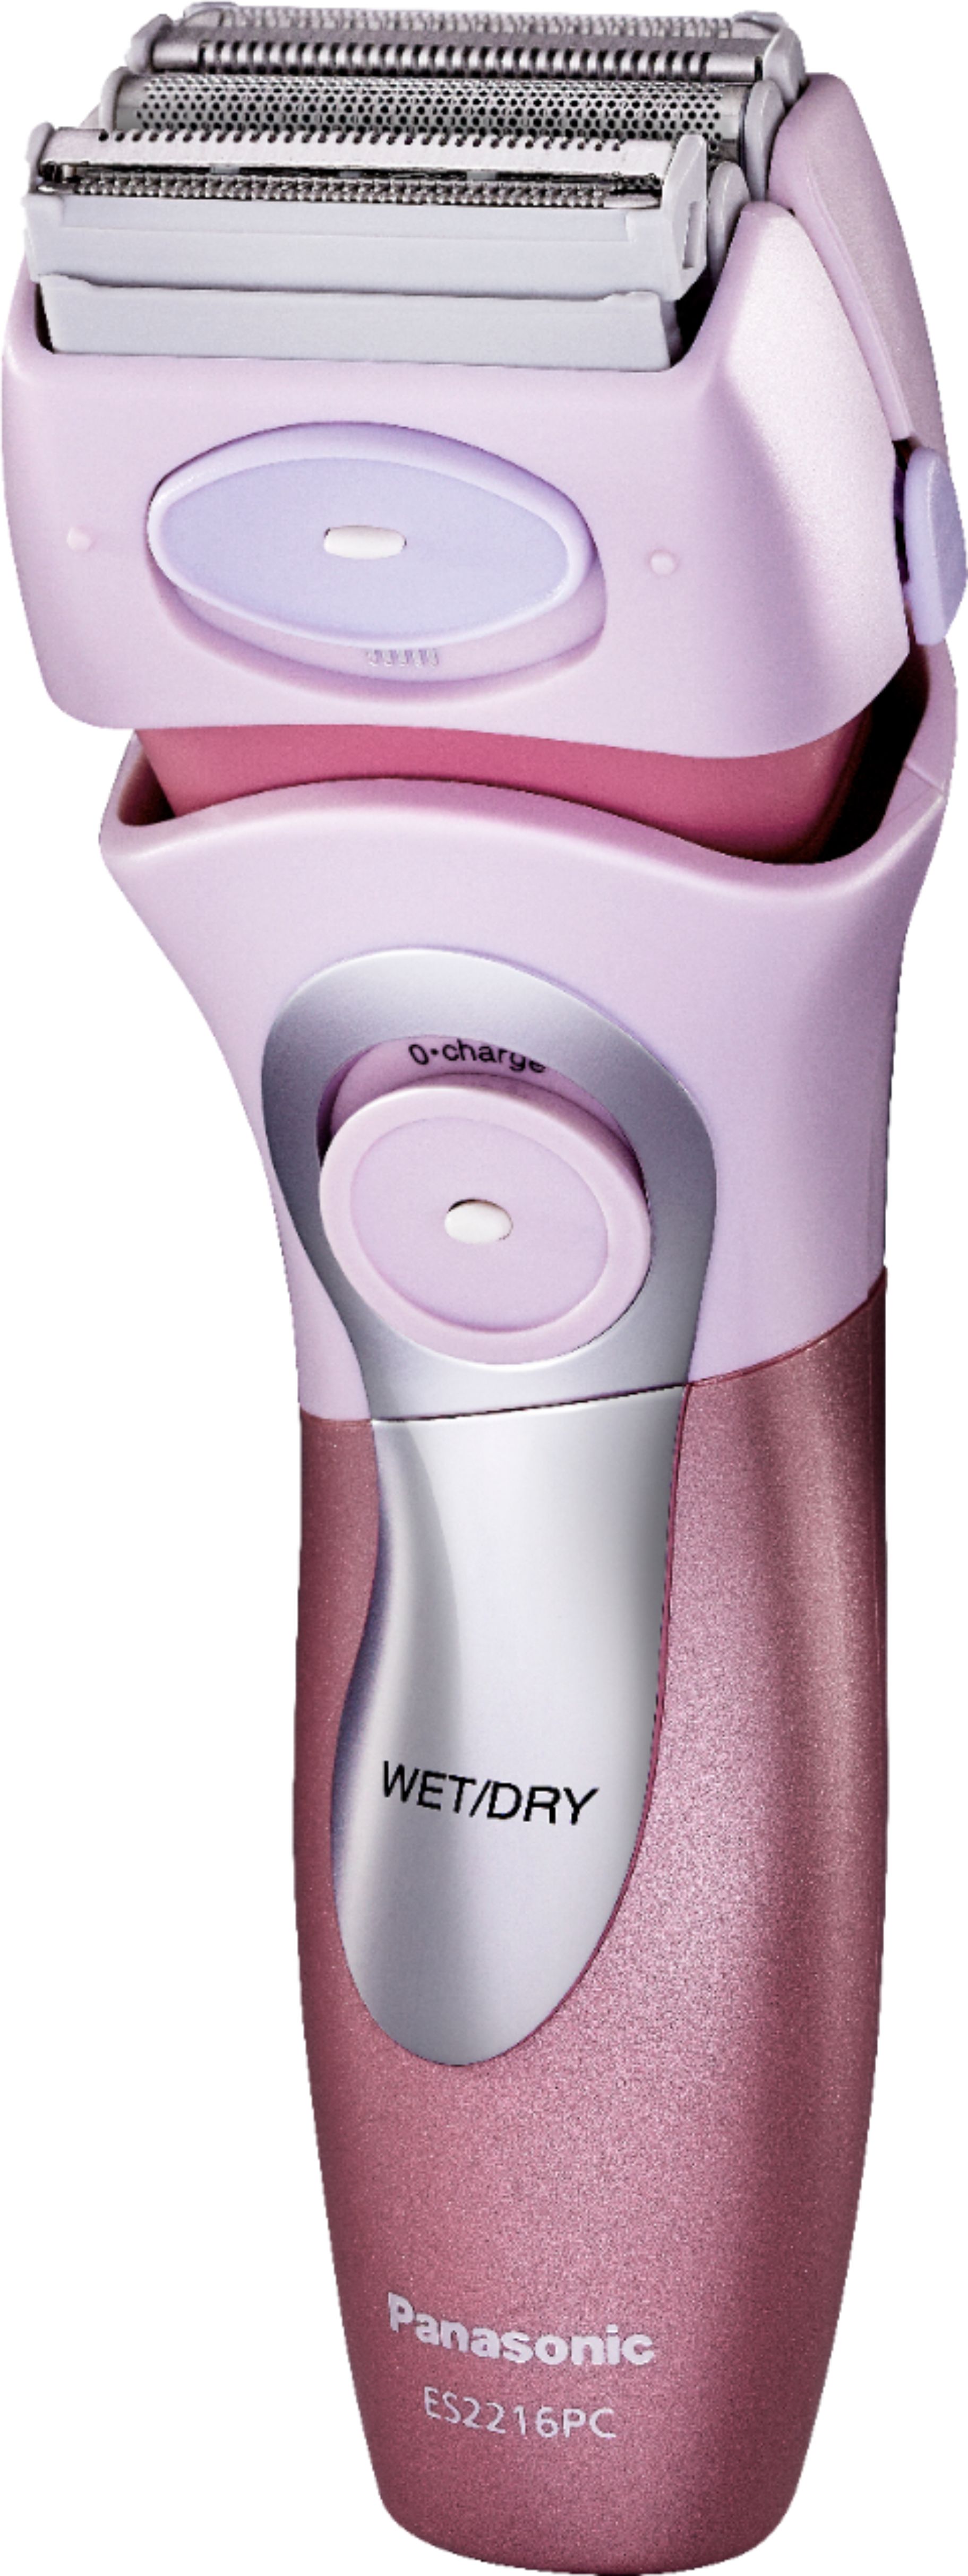 Panasonic - Wet/Dry Electric Shaver - Pink